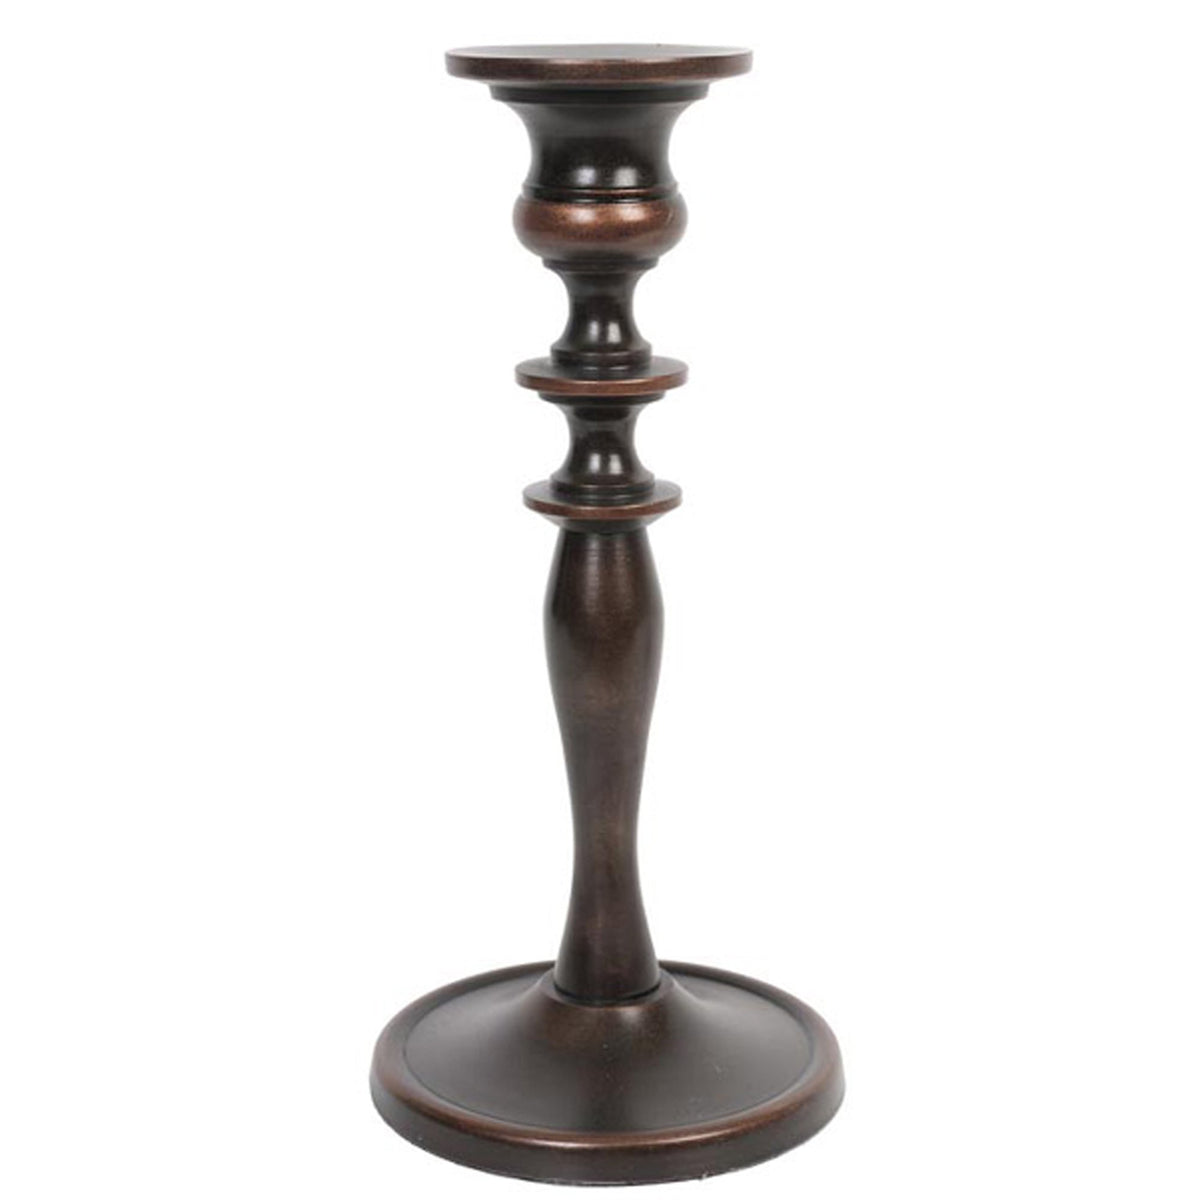 HOSLEY® Metal Taper Candle Holders, Antique Bronze Color, 8 inches High